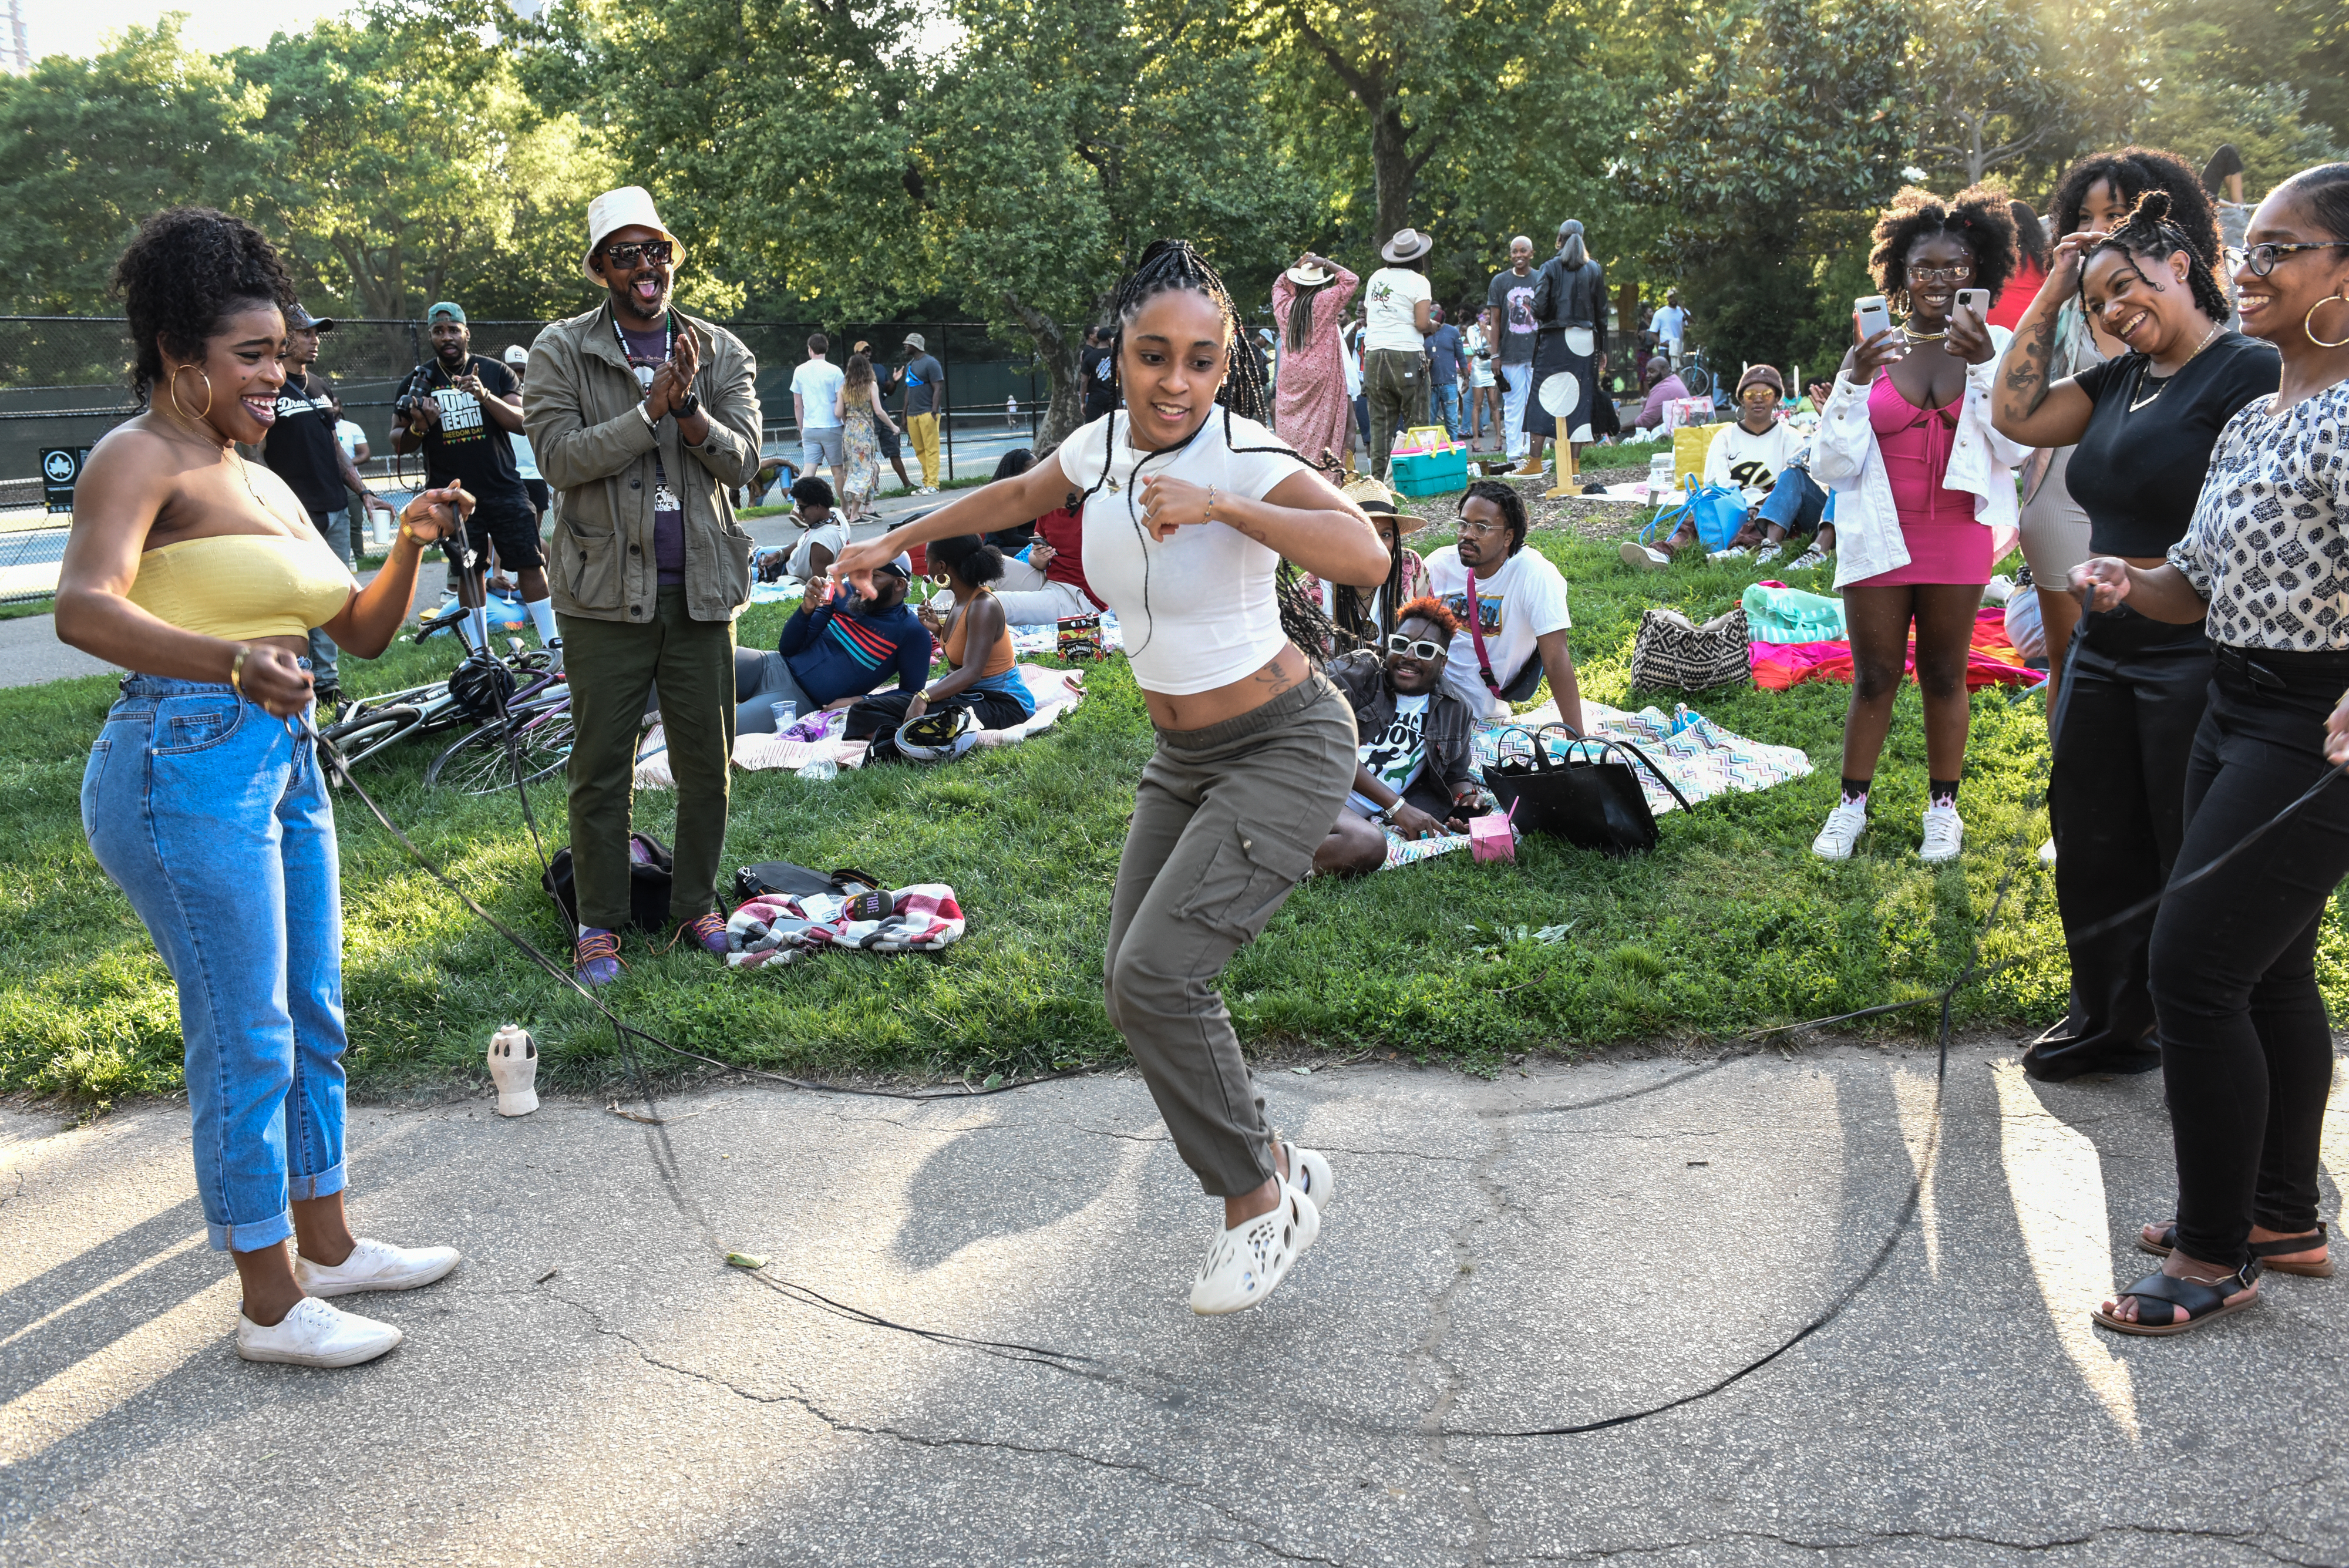 People play double dutch during a Juneteenth celebration in Fort Greene Park on June 19, 2022 in the Brooklyn borough of New York City. President Biden made Juneteenth a federal holiday in June 2021, proclaiming it as a day for all Americans to commemorate the end of slavery. The date's history goes back to the year 1865 when Union troops arrived in Galveston Bay, Texas to deliver the news that slavery had ended after President Abraham Lincoln issued the Emancipation Proclamation on January 1, 1863. (Photo by Stephanie Keith/Getty Images)